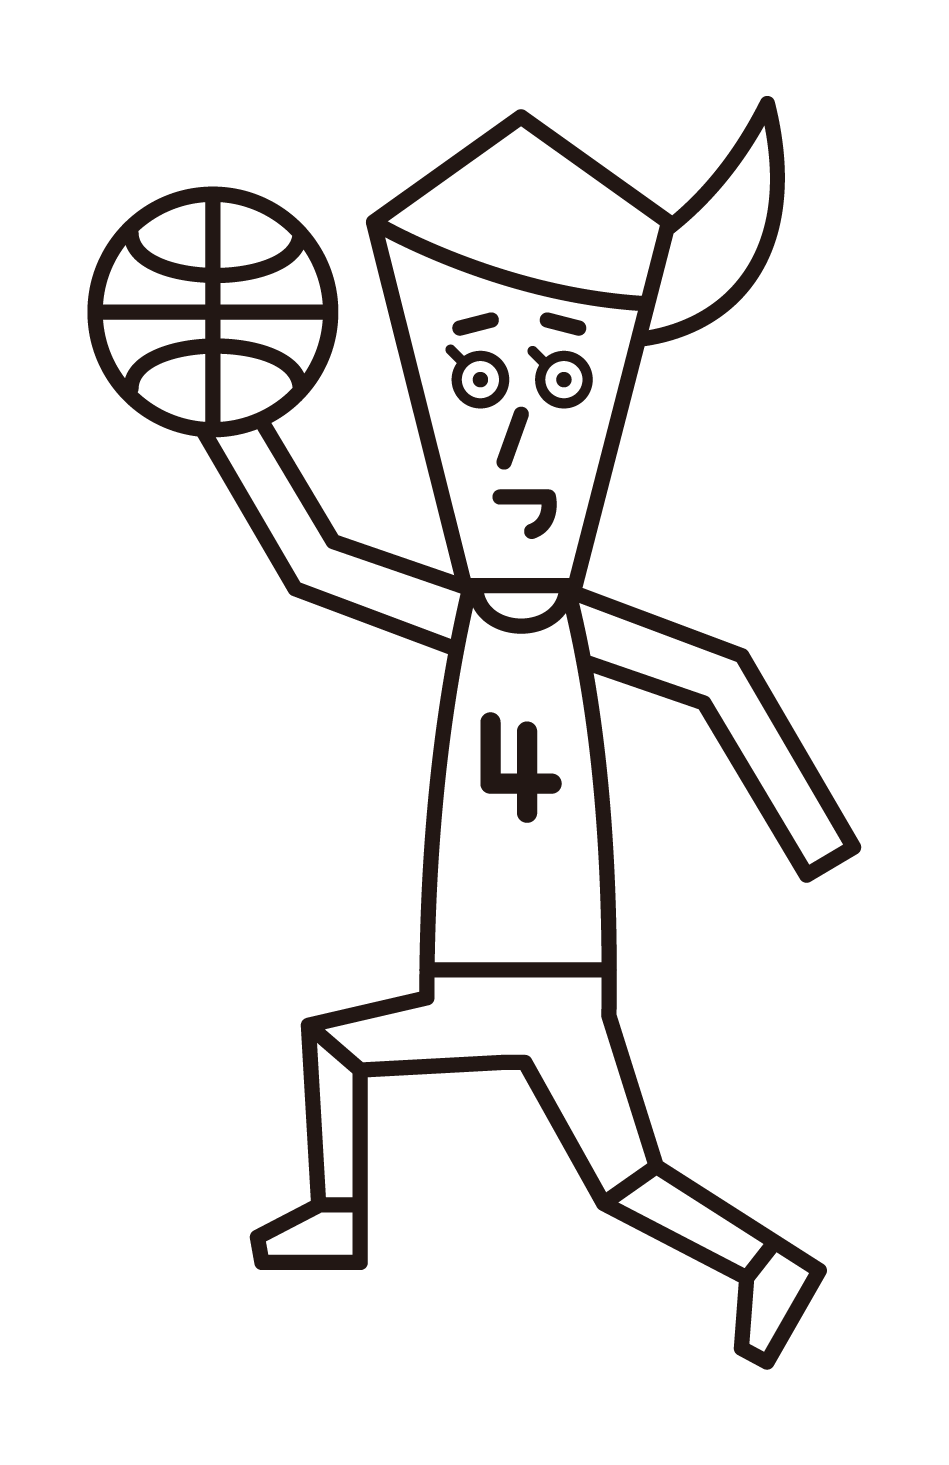 Illustration of a basketball player (female) shooting a layup